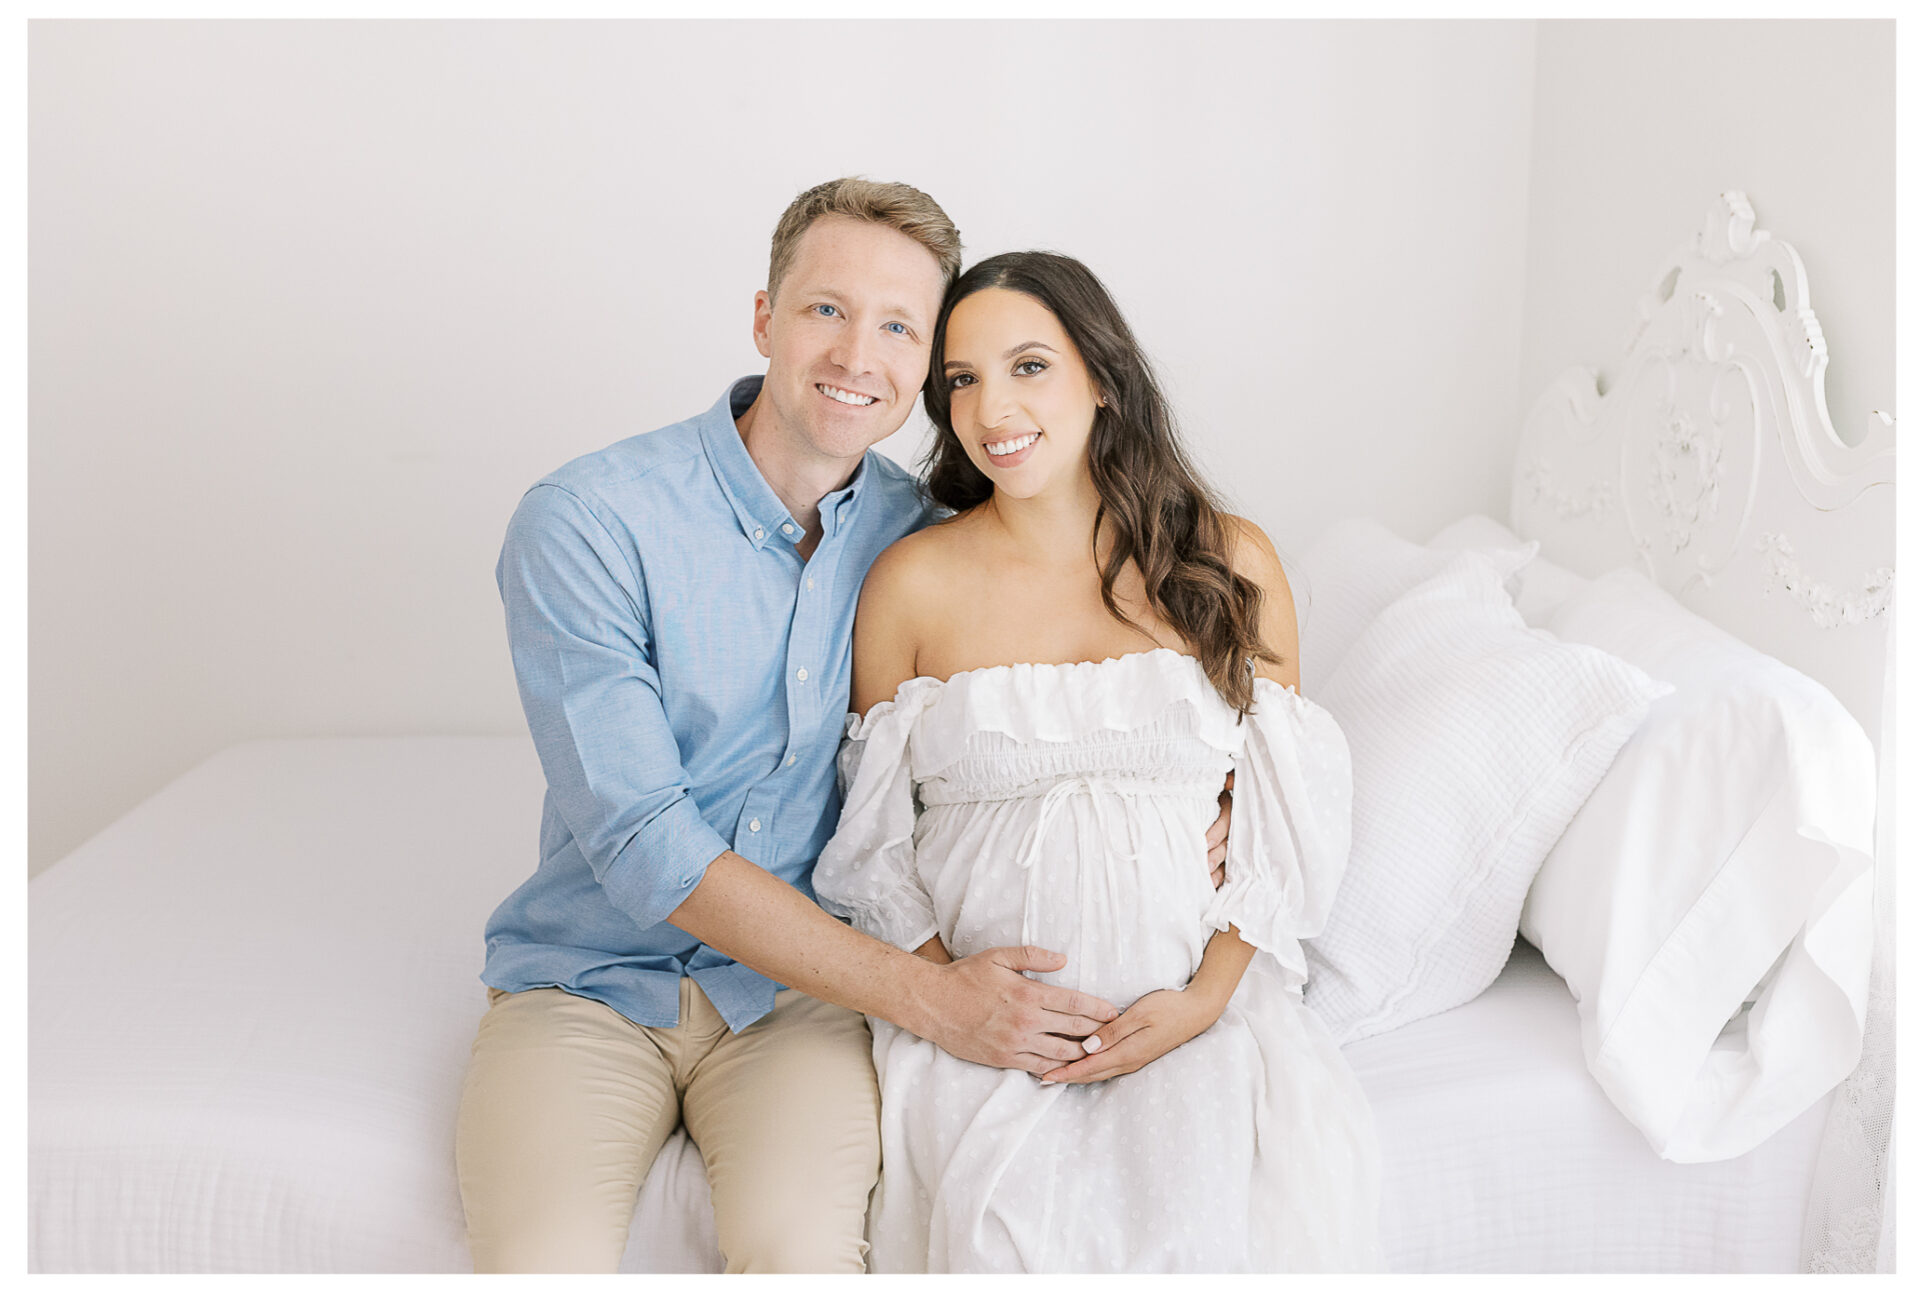 Winter Freire Photography | Natural Light Studio Maternity Session in Dayton, OH | Mama-to-be and husband smiling together with their hands on the baby bump